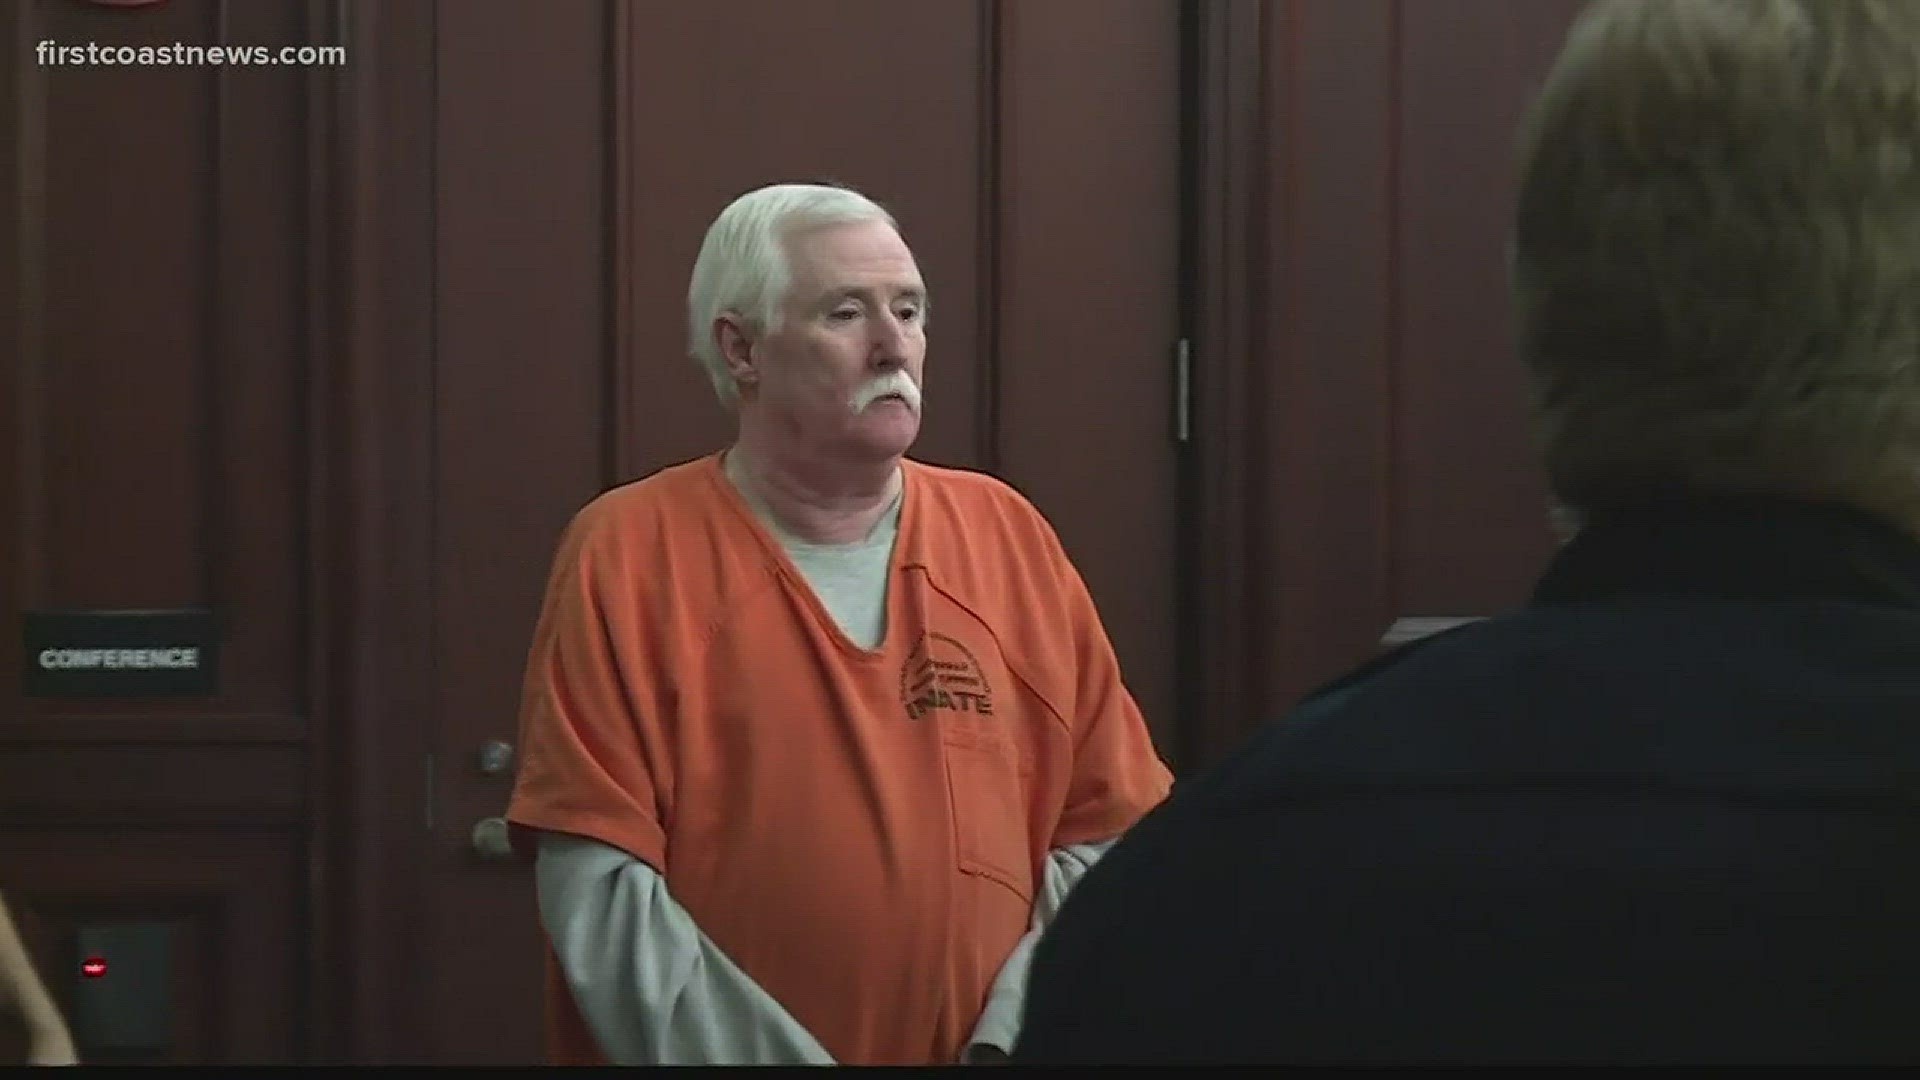 Donald Smith back in court before his trial next month